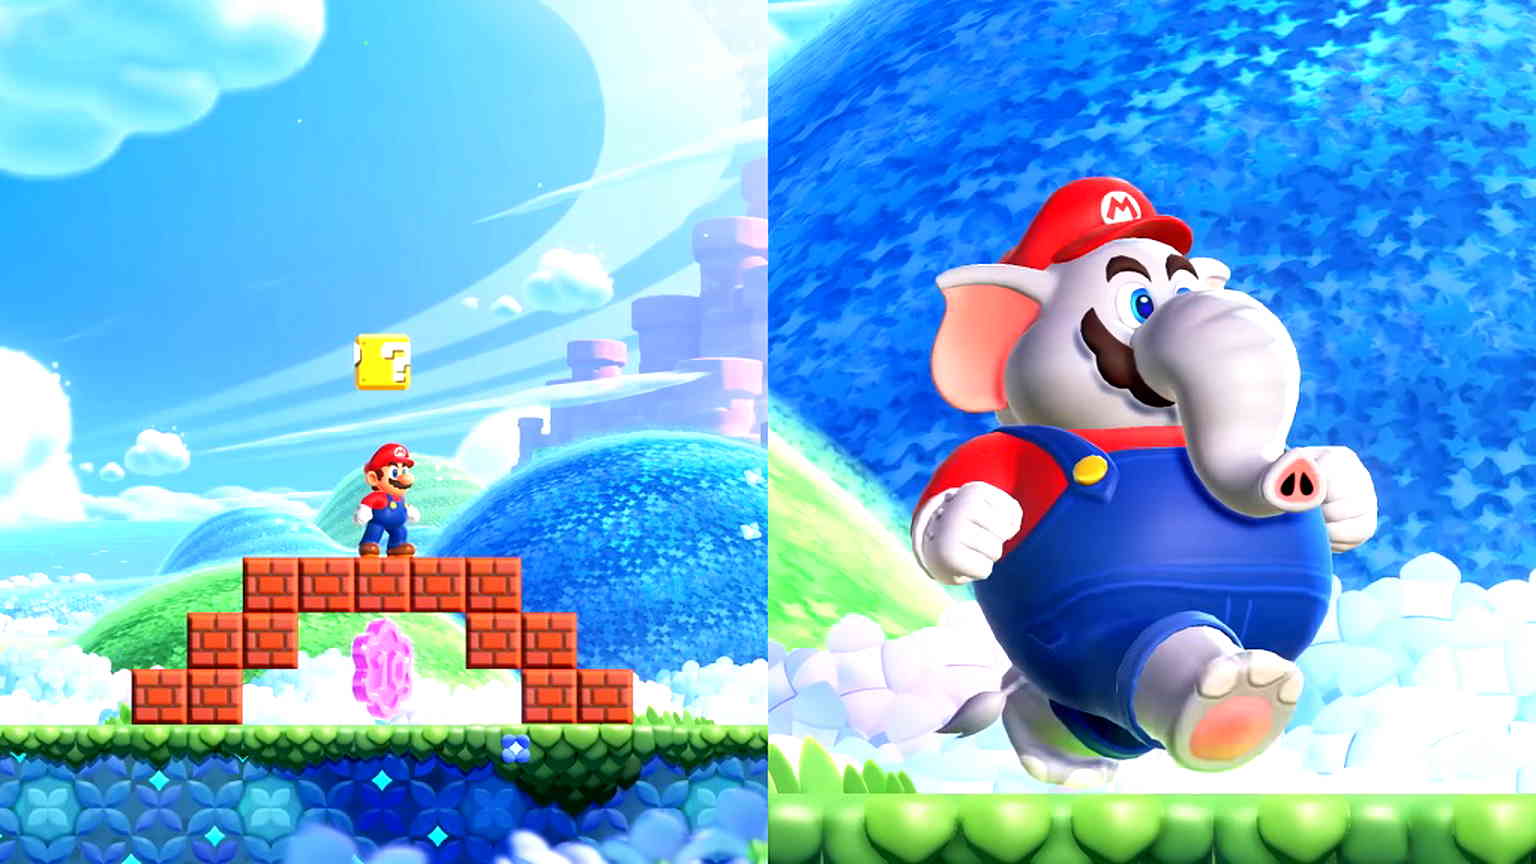 Watch: Mario can turn into an elephant in upcoming ‘Super Mario Bros. Wonder’